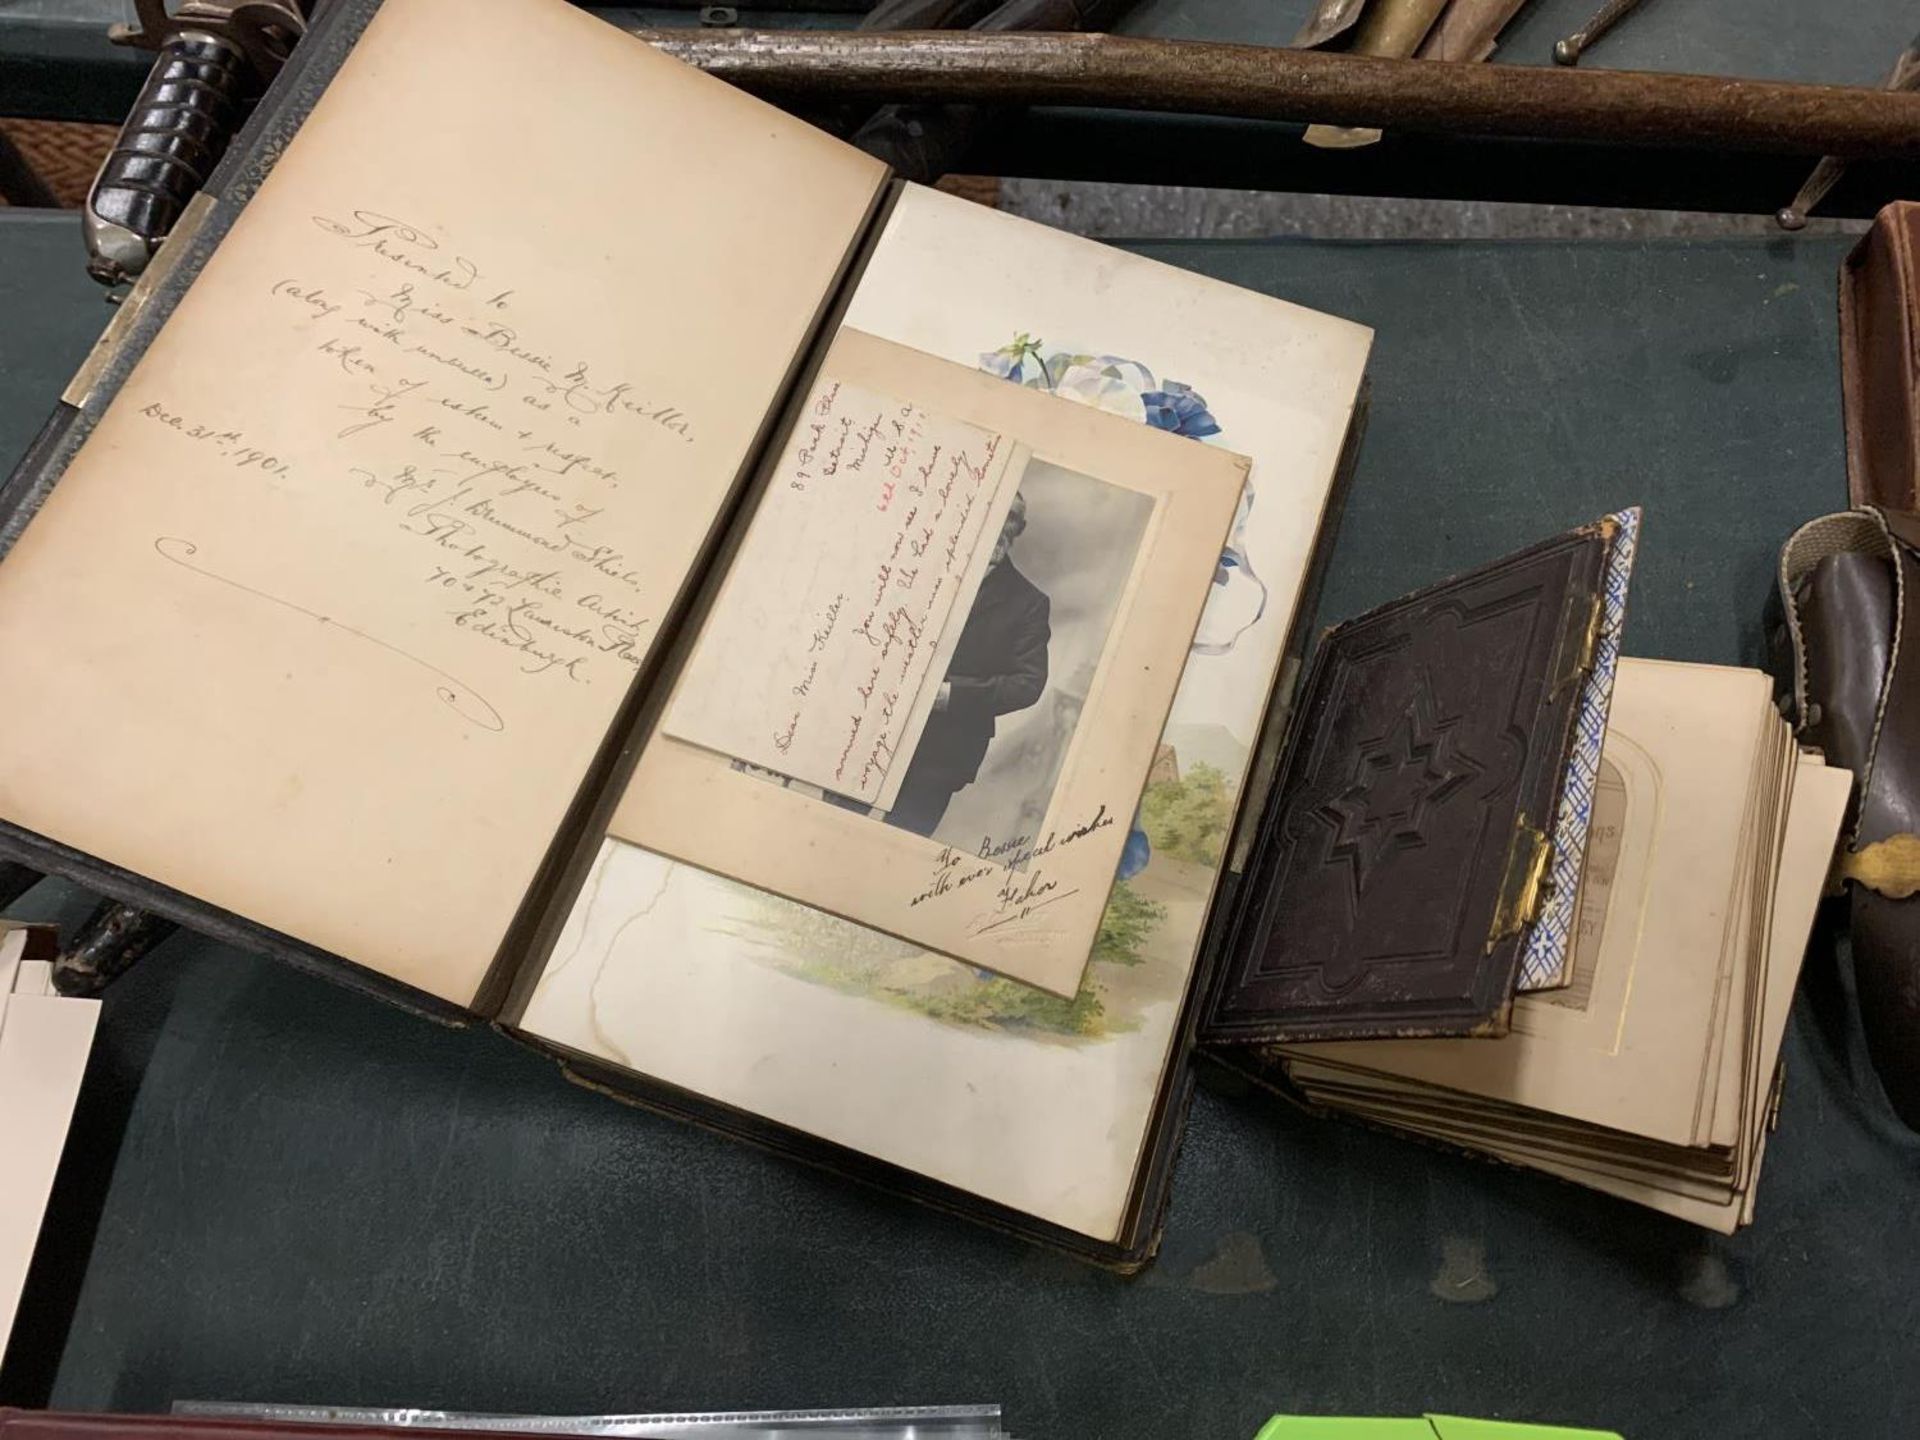 TWO EARLY 1900'S PHOTOGRAPH ALBUMS FILLED WITH FAMILY PHOTOS